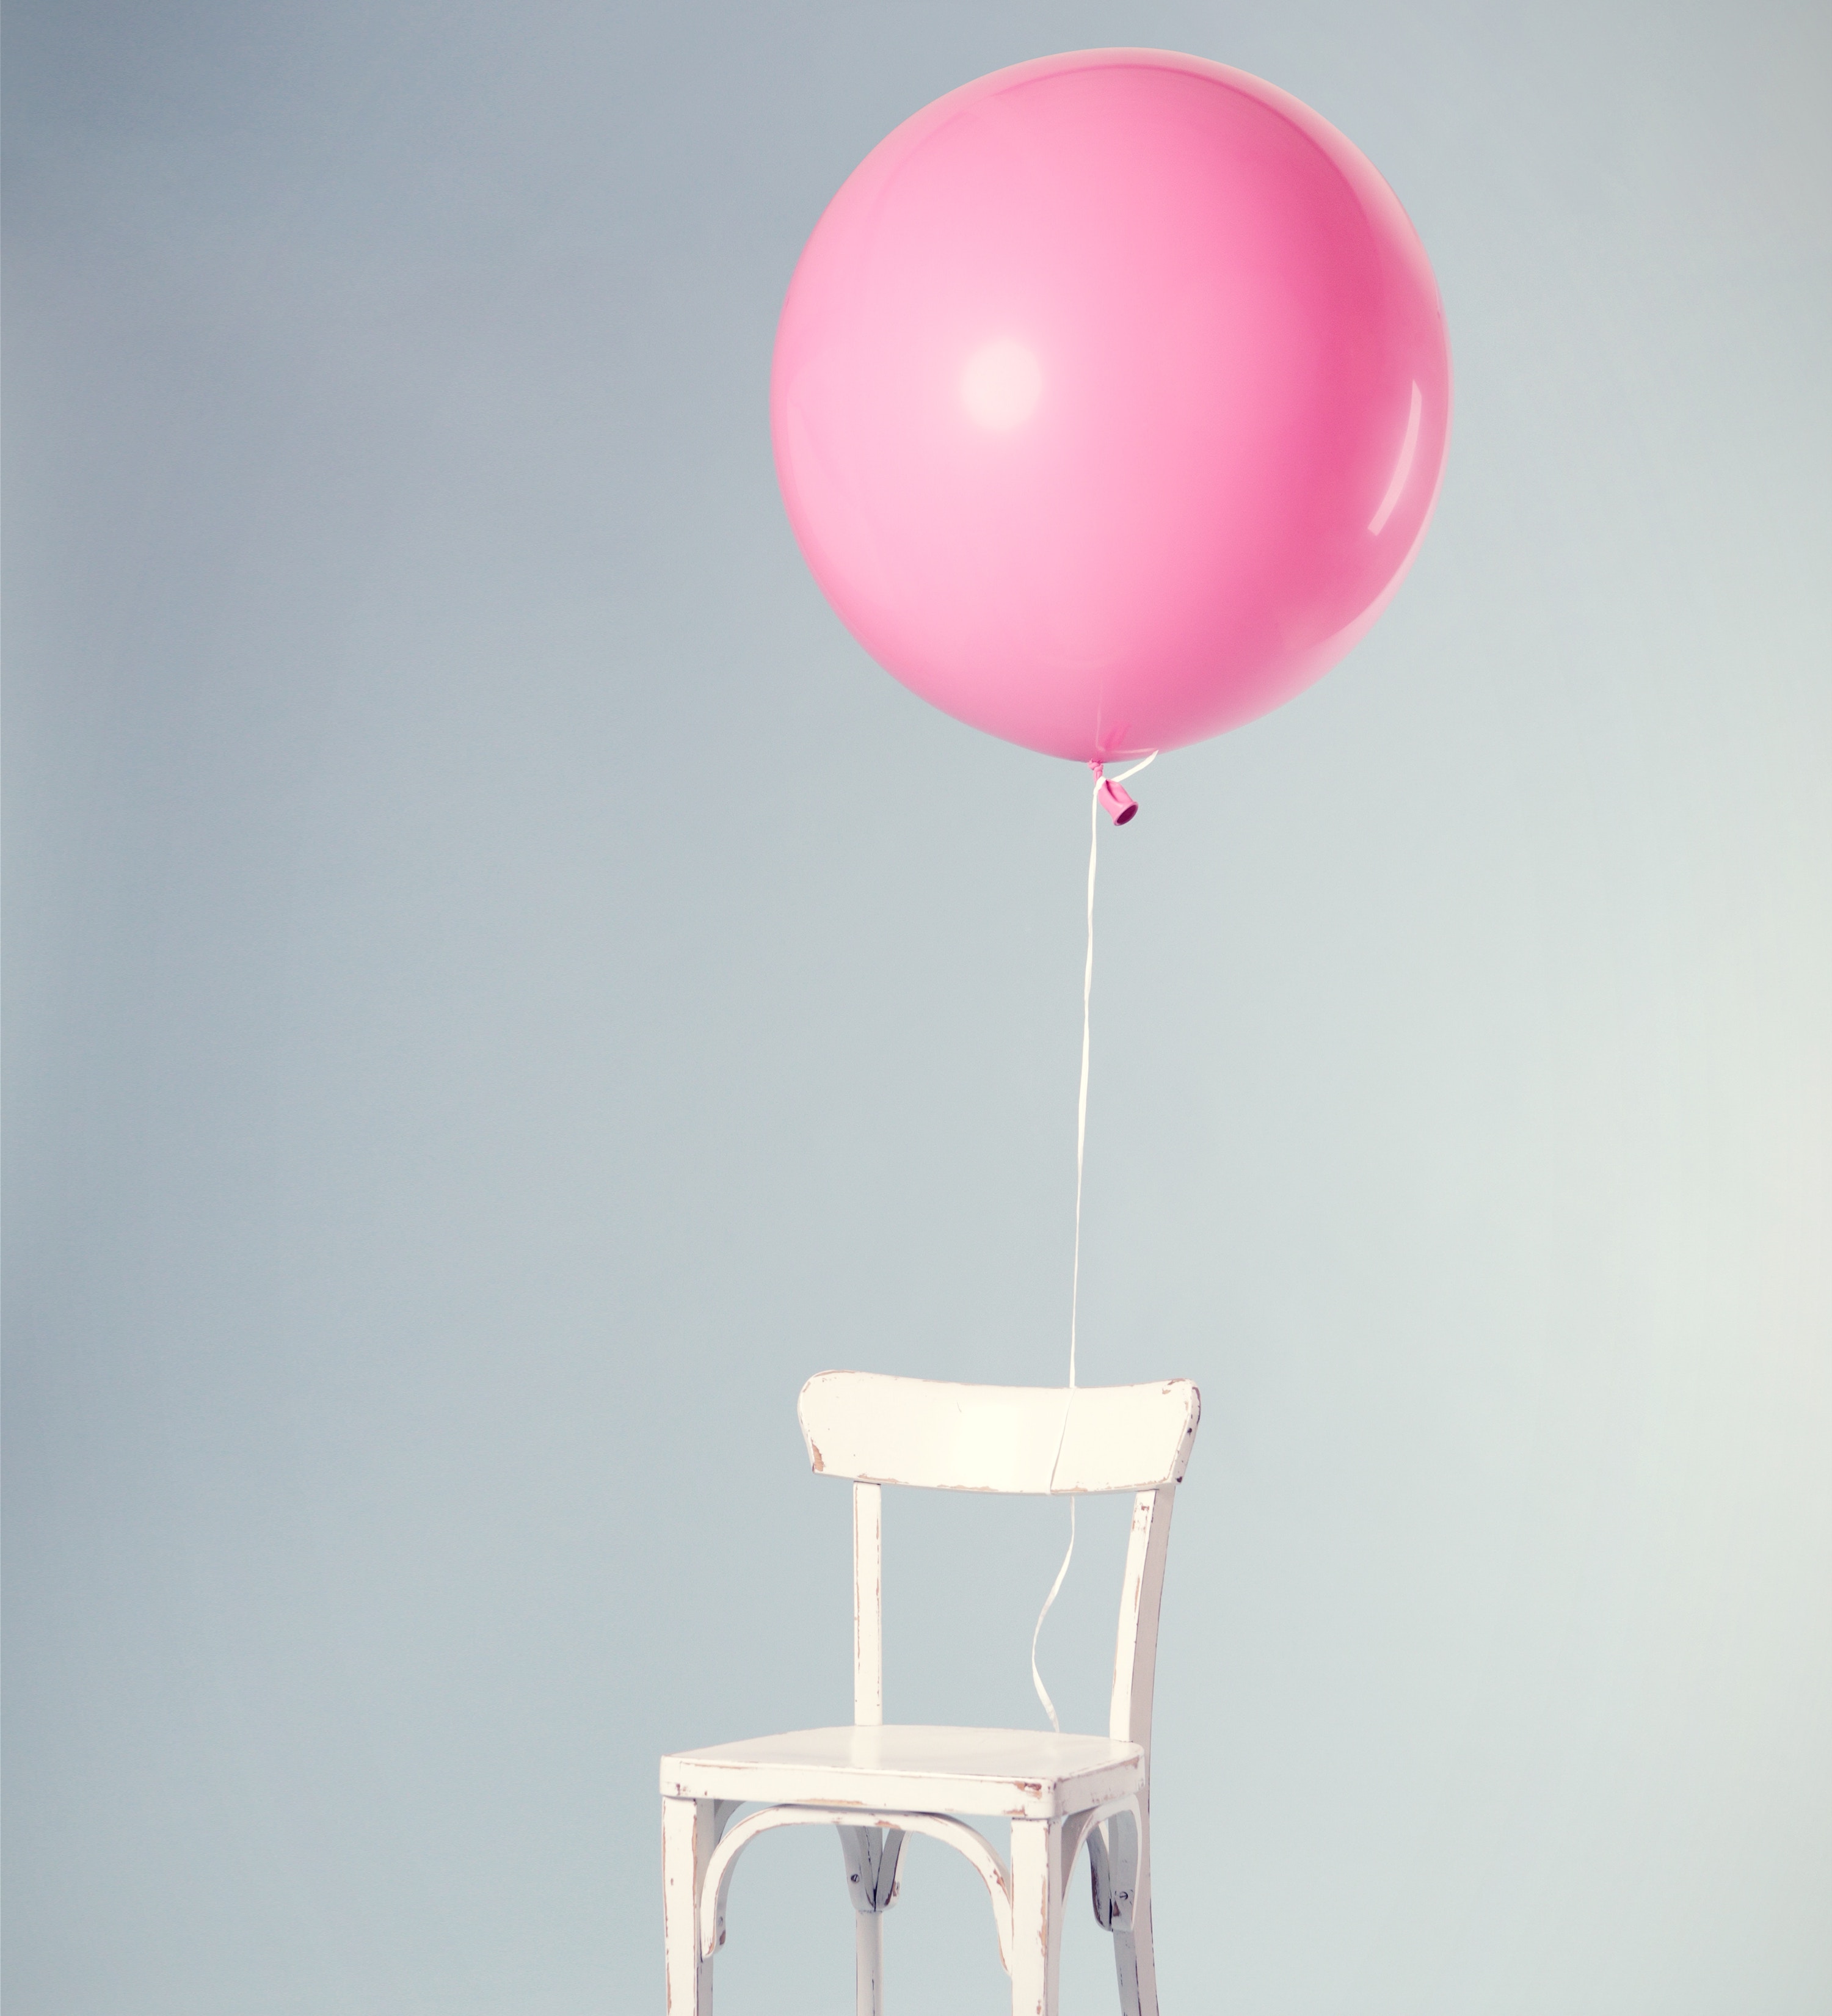 Chair with pink balloon tied on